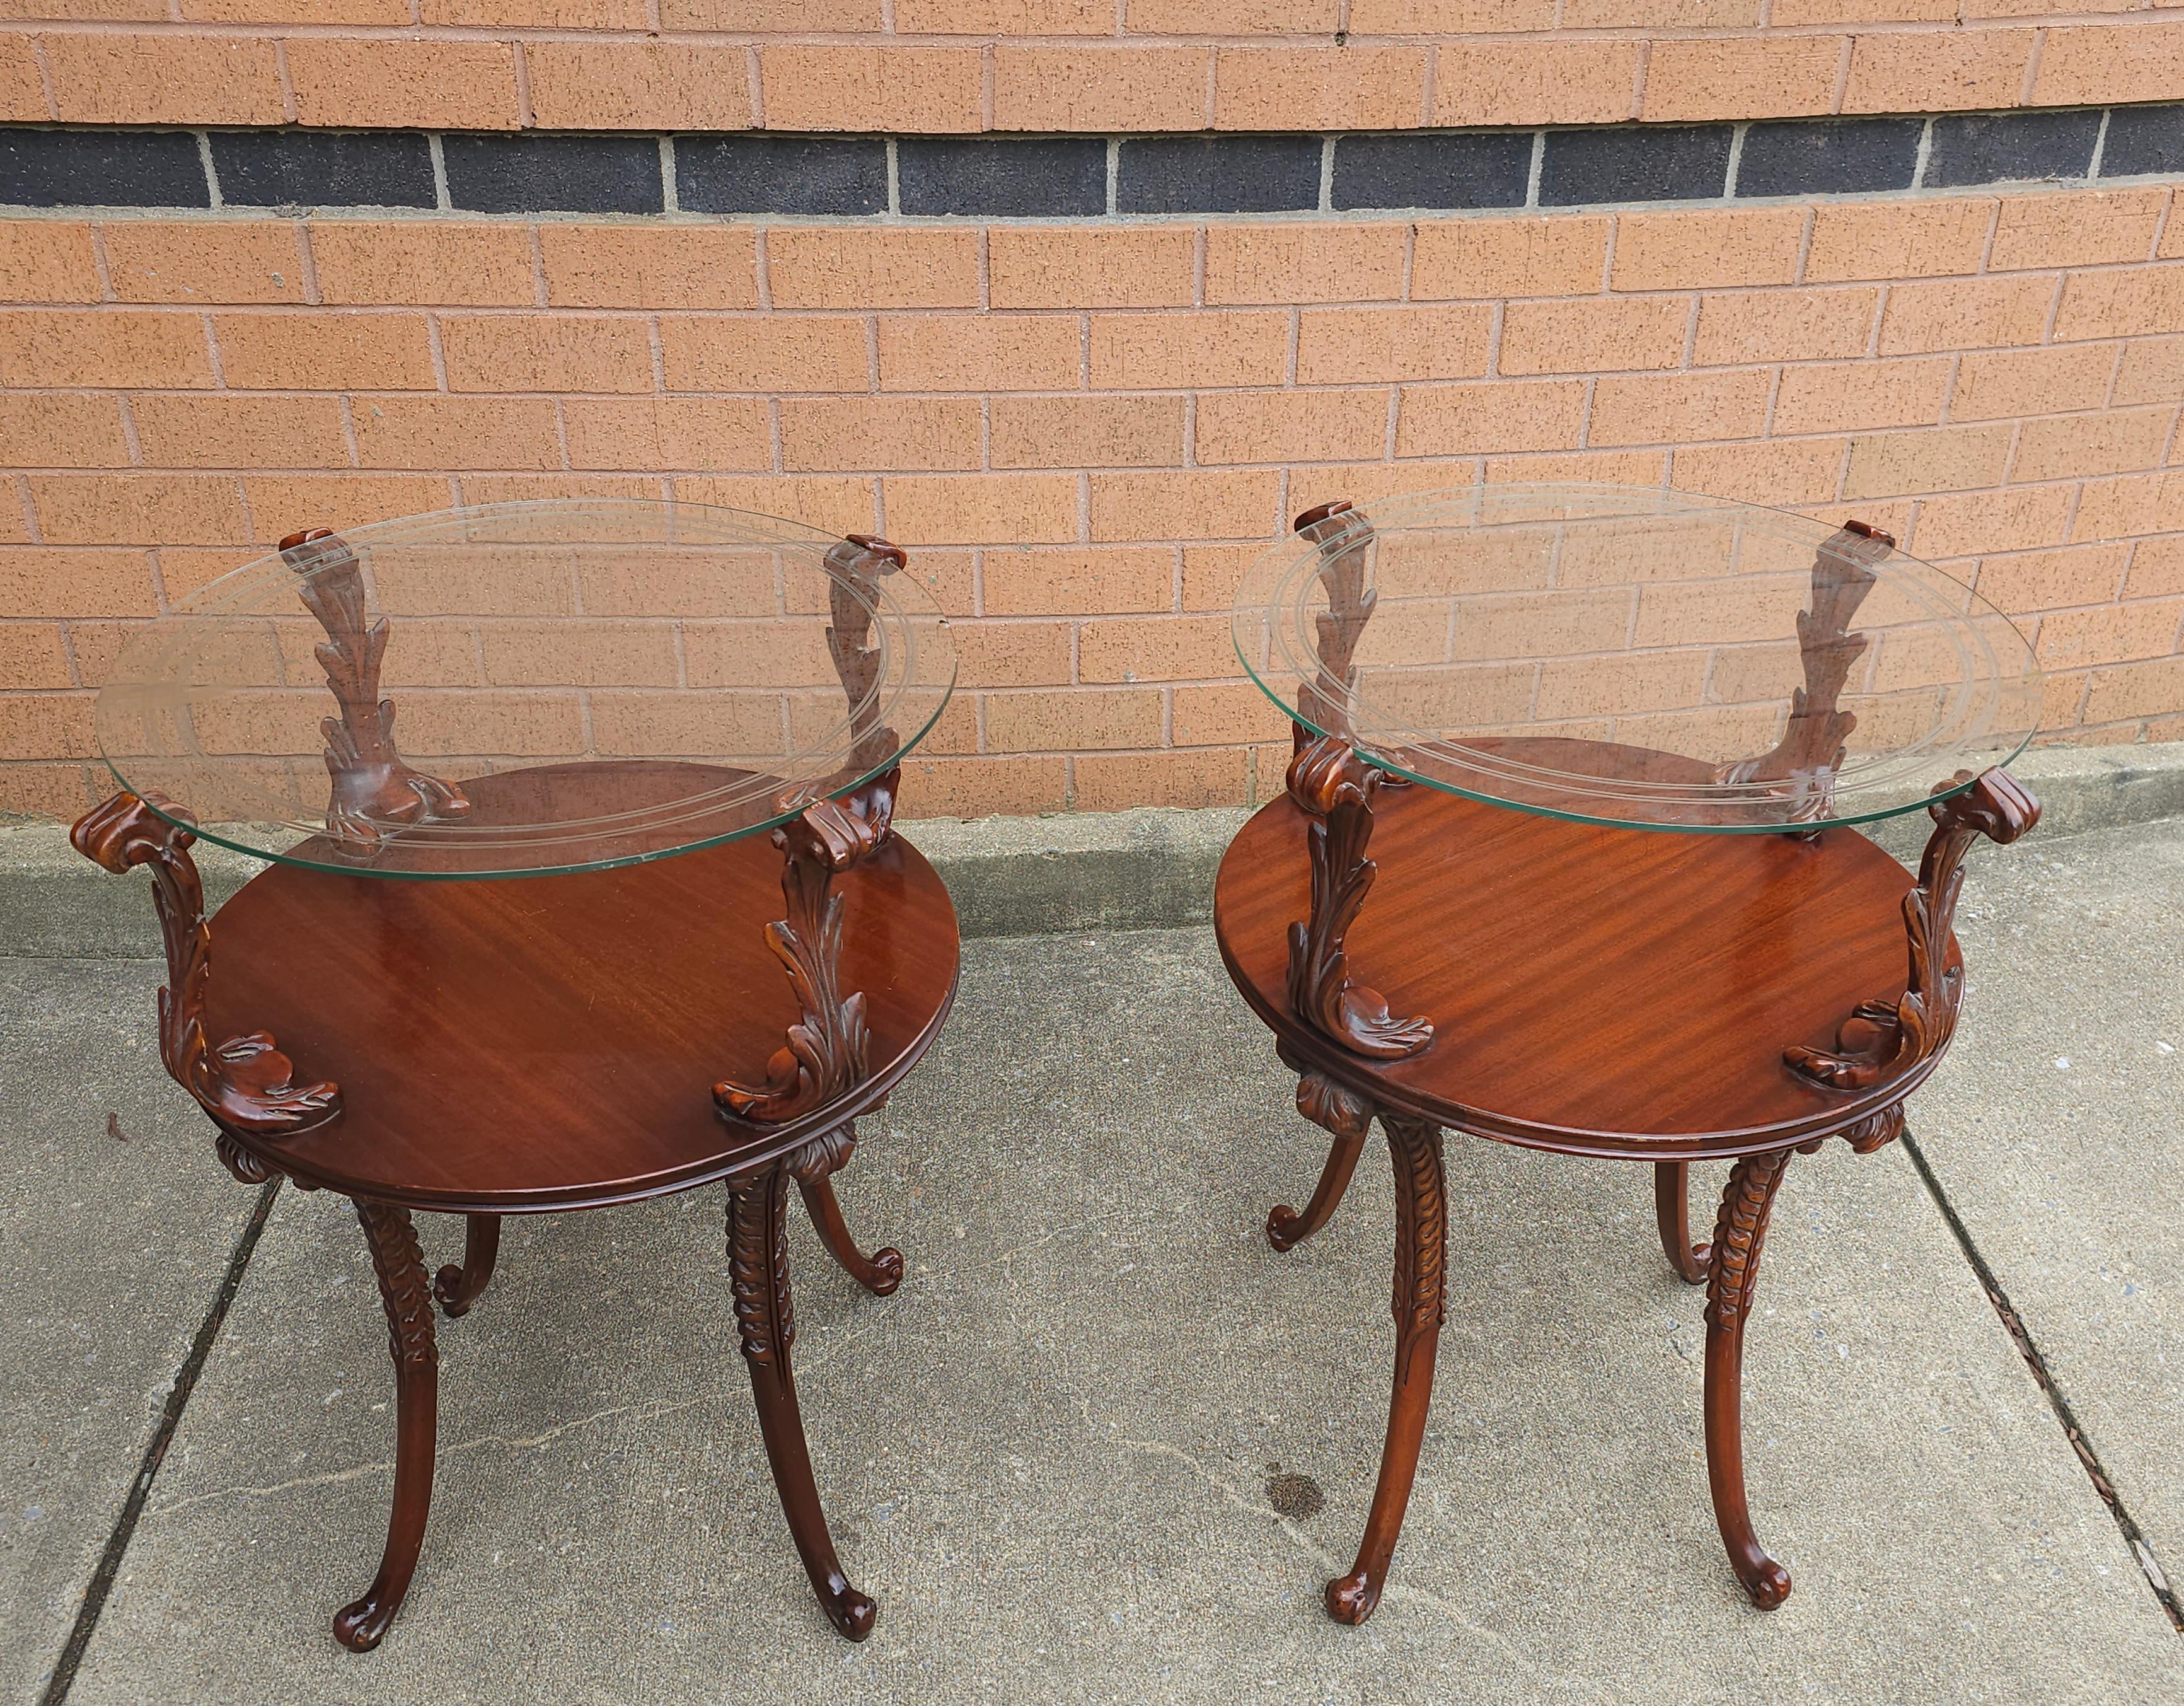 Pair of Victorian Style Two Tier Carved Mahogany with acanthus leaves and Glass Top Side Tables. Measures 20